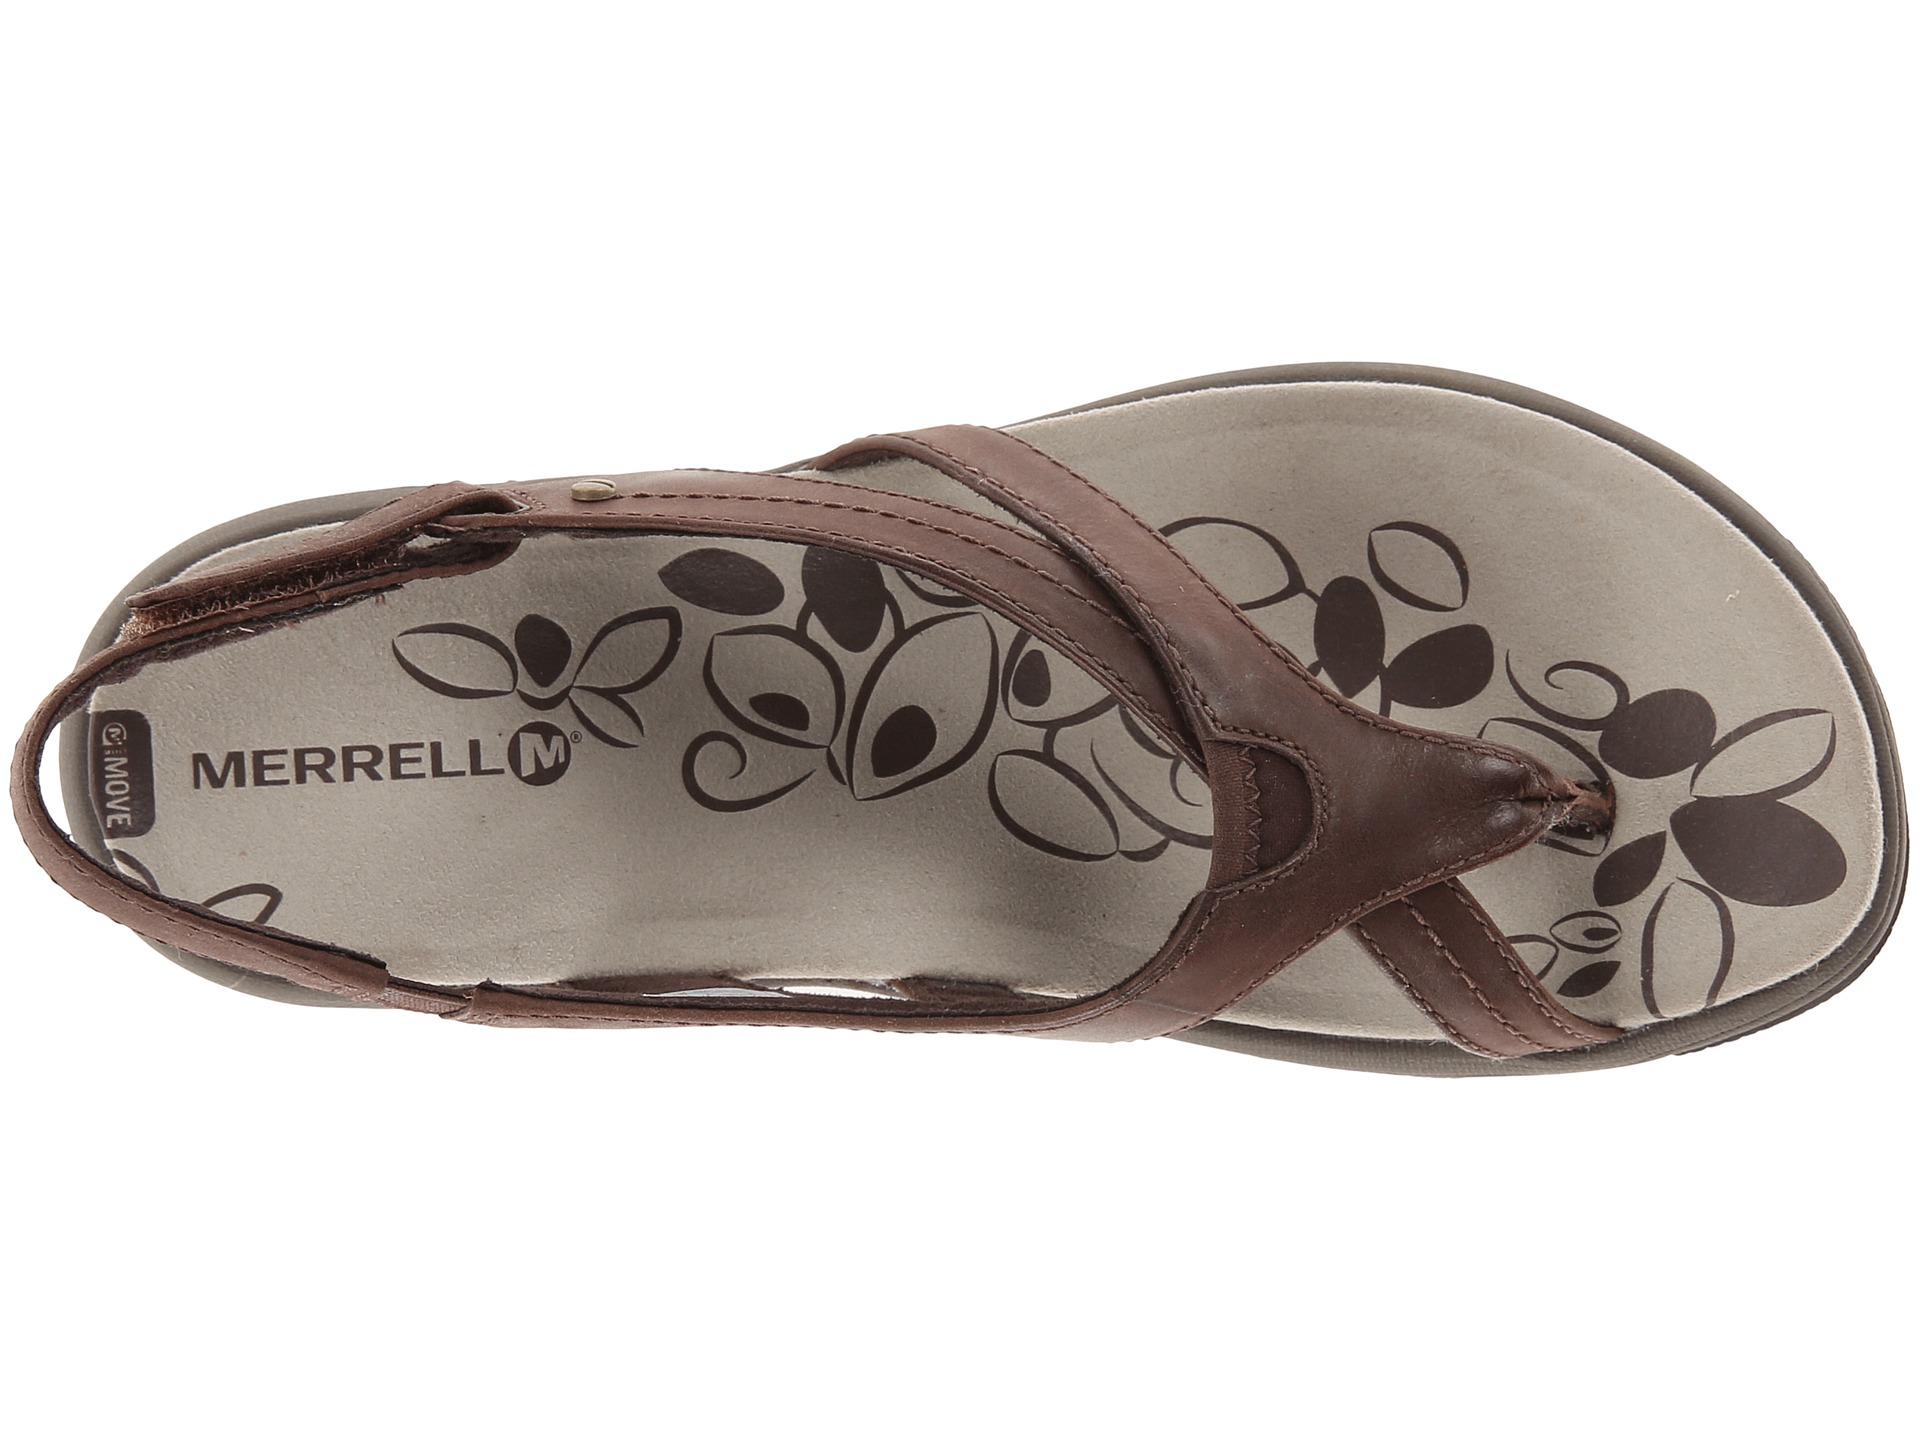 No results for merrell buzz leather bracken - Search Zappos